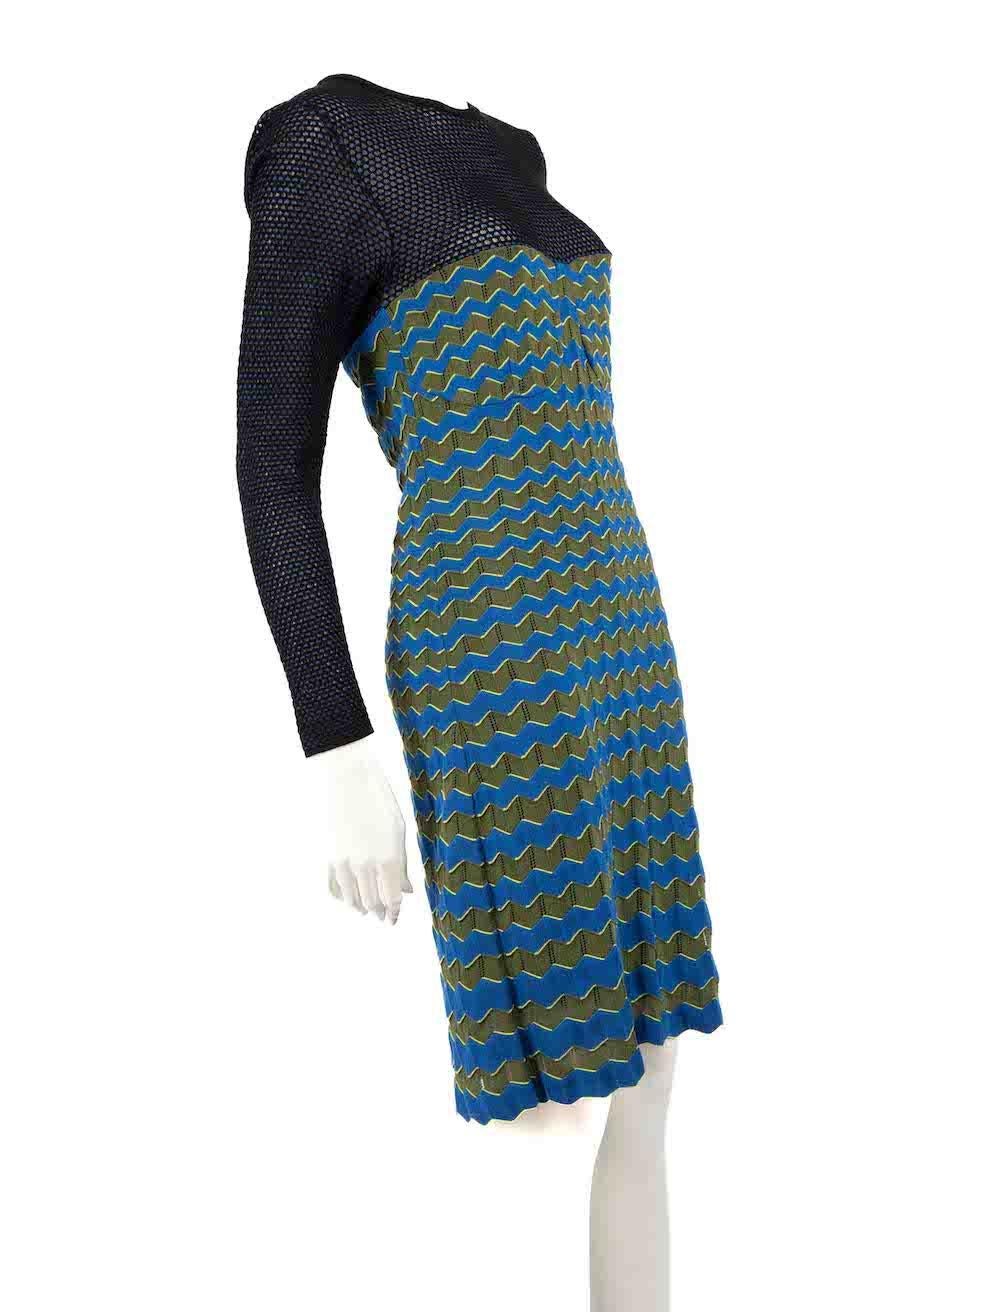 CONDITION is Very good. Hardly any visible wear to dress is evident on this used M by Missoni designer resale item. Composition label is removed.
 
 
 
 Details
 
 
 Multicolour- blue, green
 
 Synthetic
 
 Knit dress
 
 Zigzag pattern
 
 Midi
 
